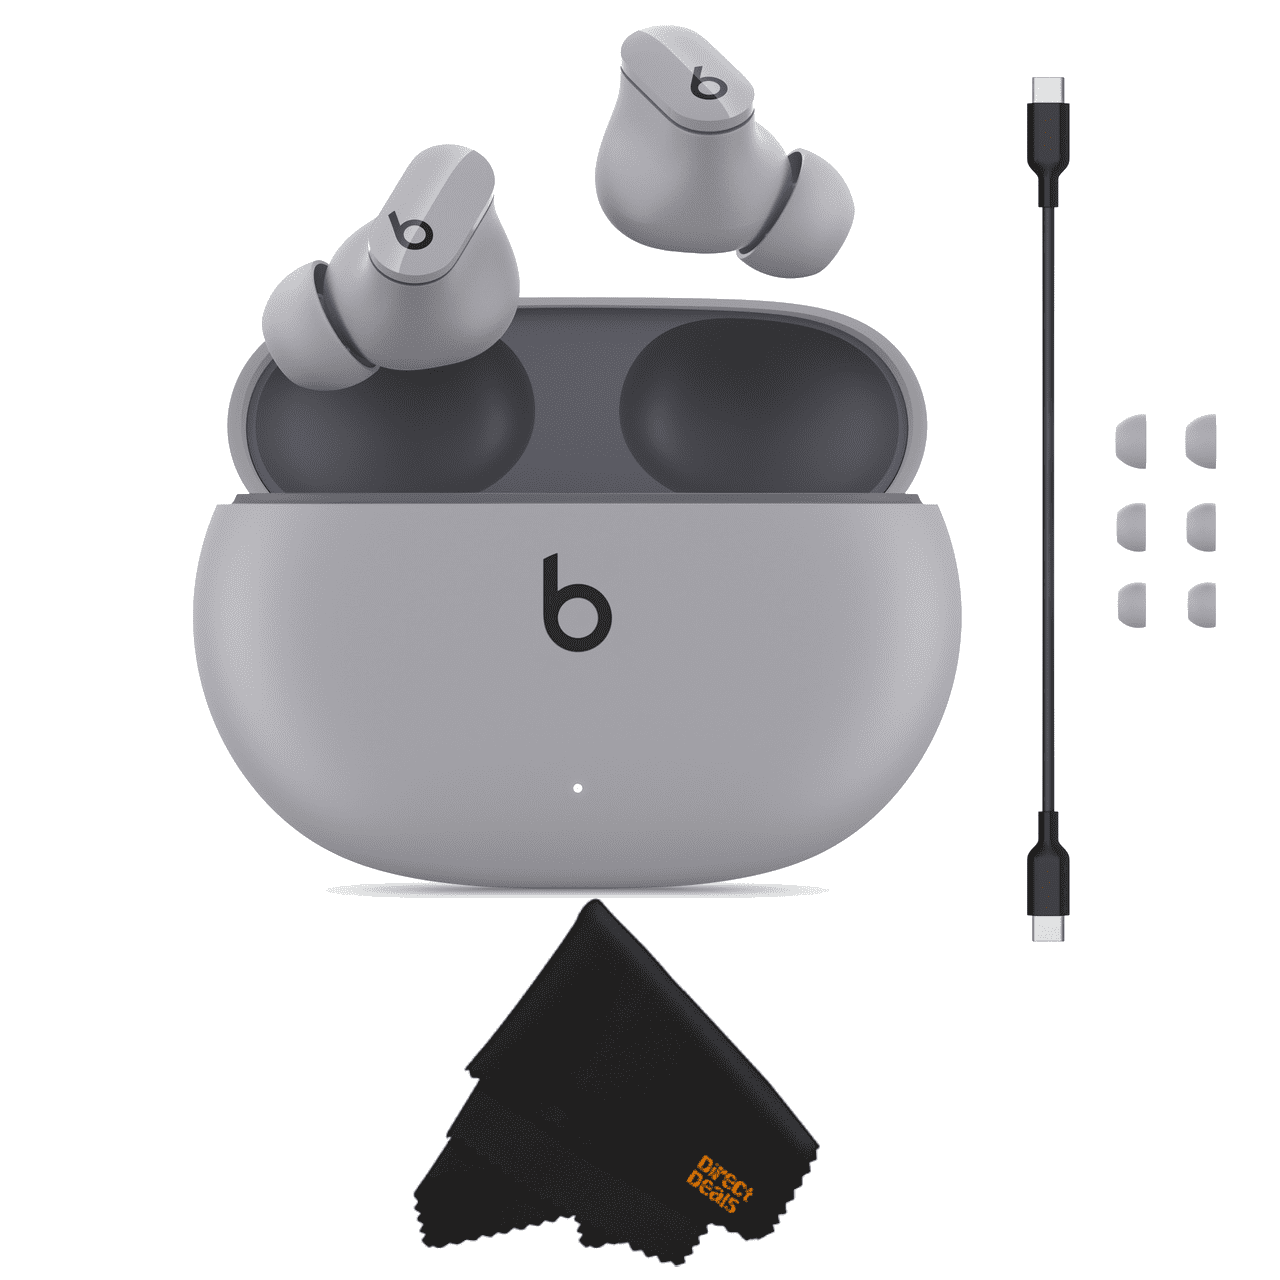 Beats Studio Buds - True Wireless Noise Cancelling Earbuds White